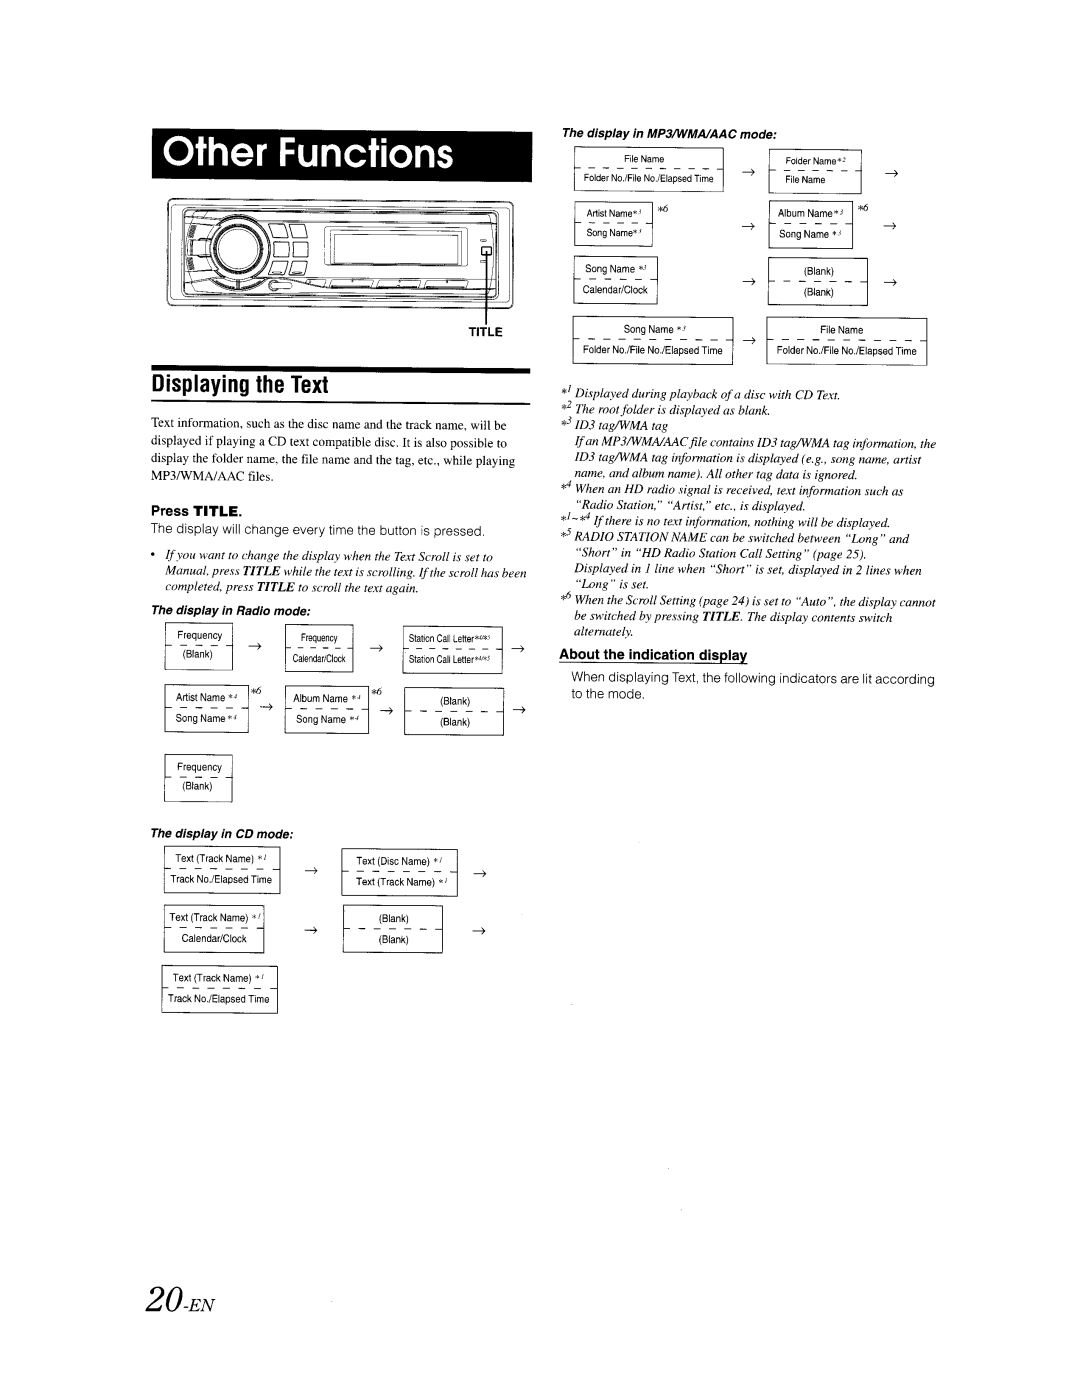 Alpine CDA-9887 owner manual 20-EN, Displaying the Text, Other Functions 